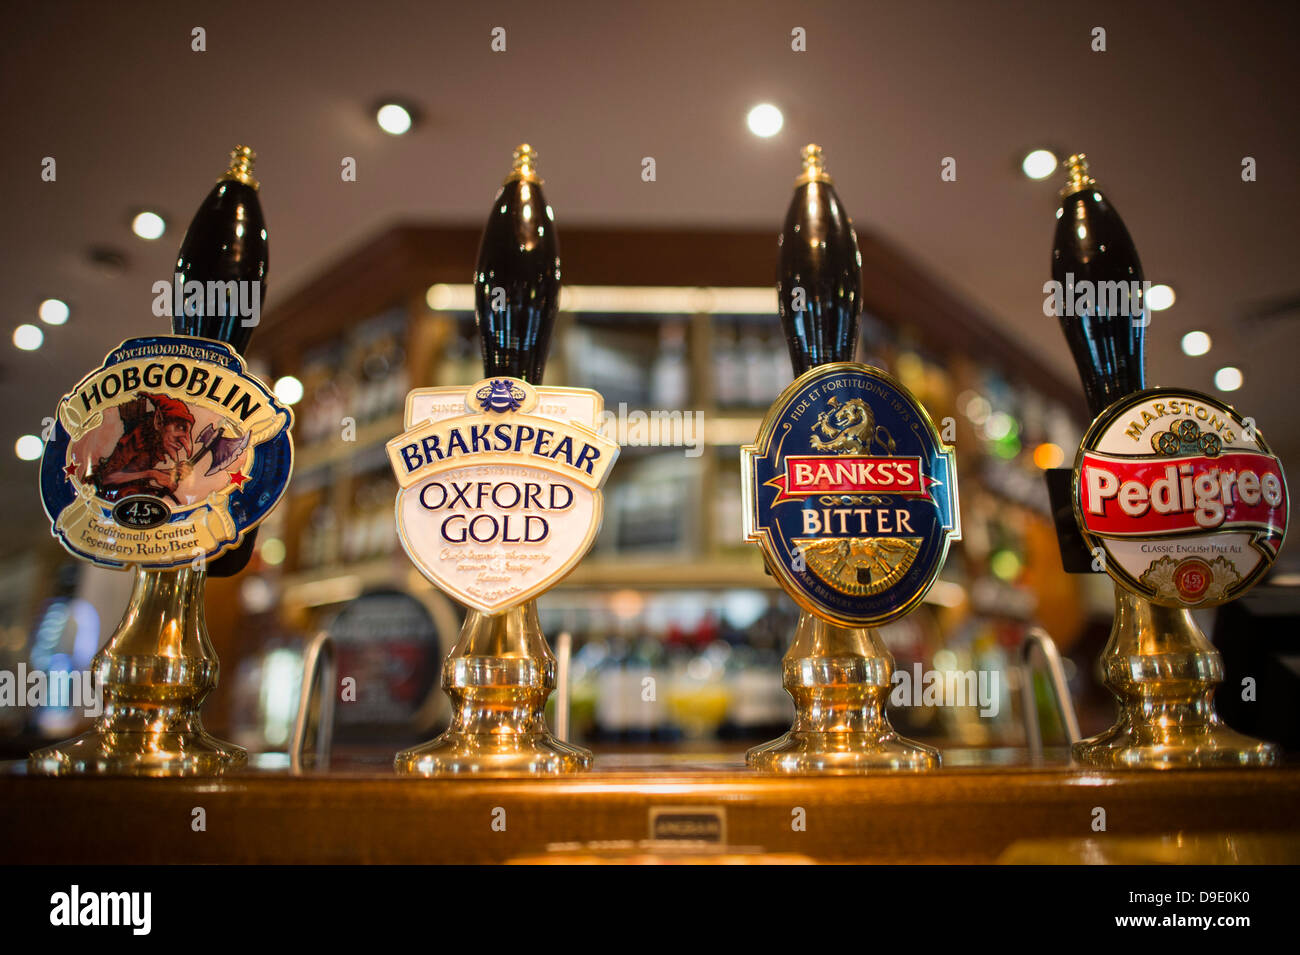 Four draught real ales beer in a pub bar, UK Brakspear Oxford Gold, Banks;s, Marstons, Stock Photo